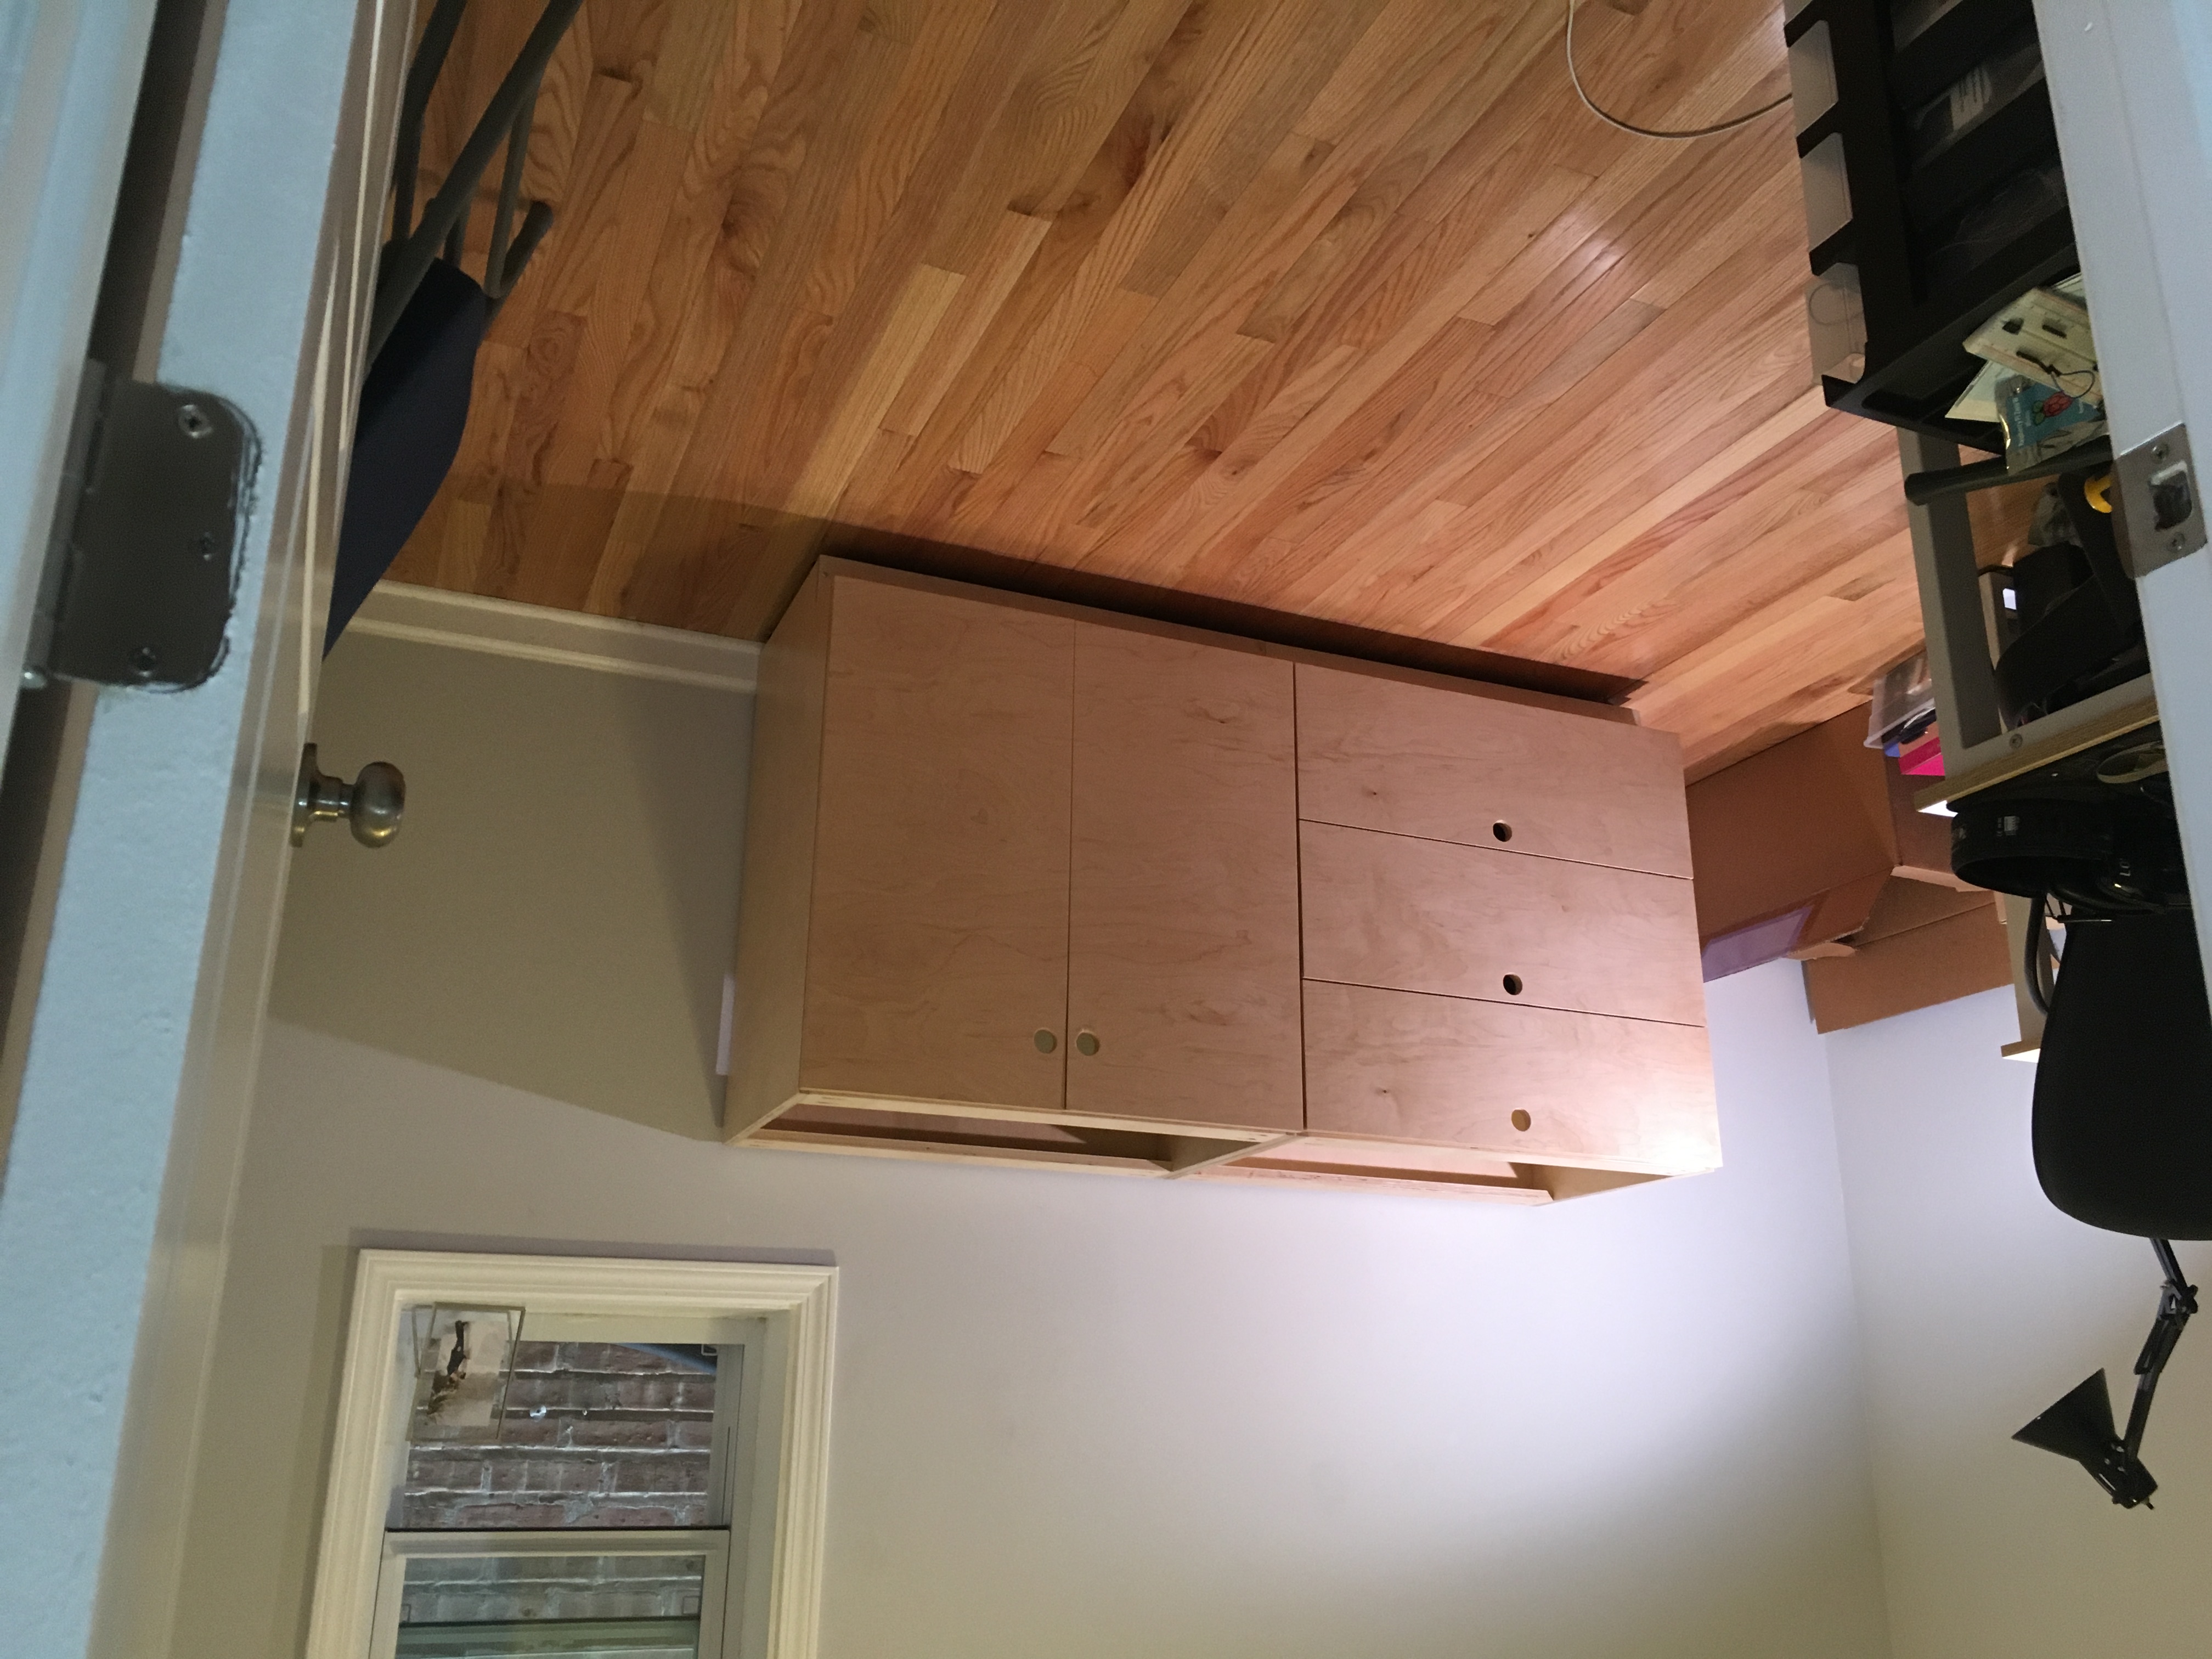 Installation of cabinets before the top went on. I used leveling
feet to get bot of these perfectly even and level.